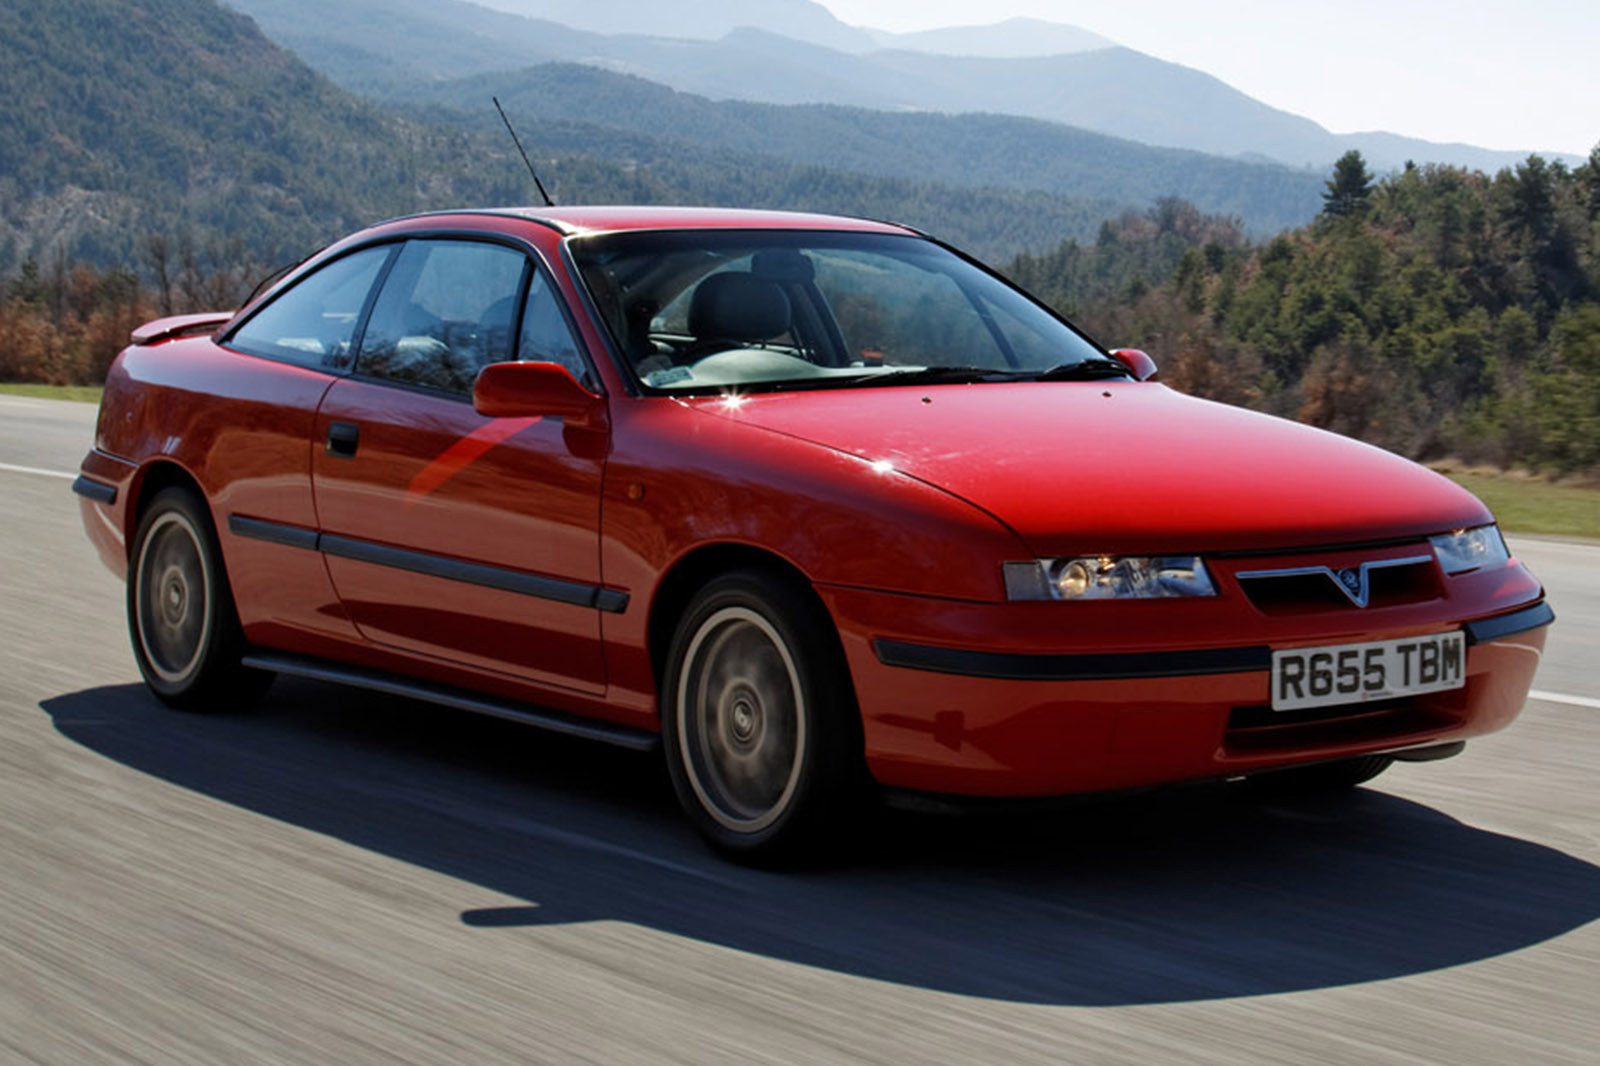 Used car buying guide: Vauxhall Calibra | Autocar